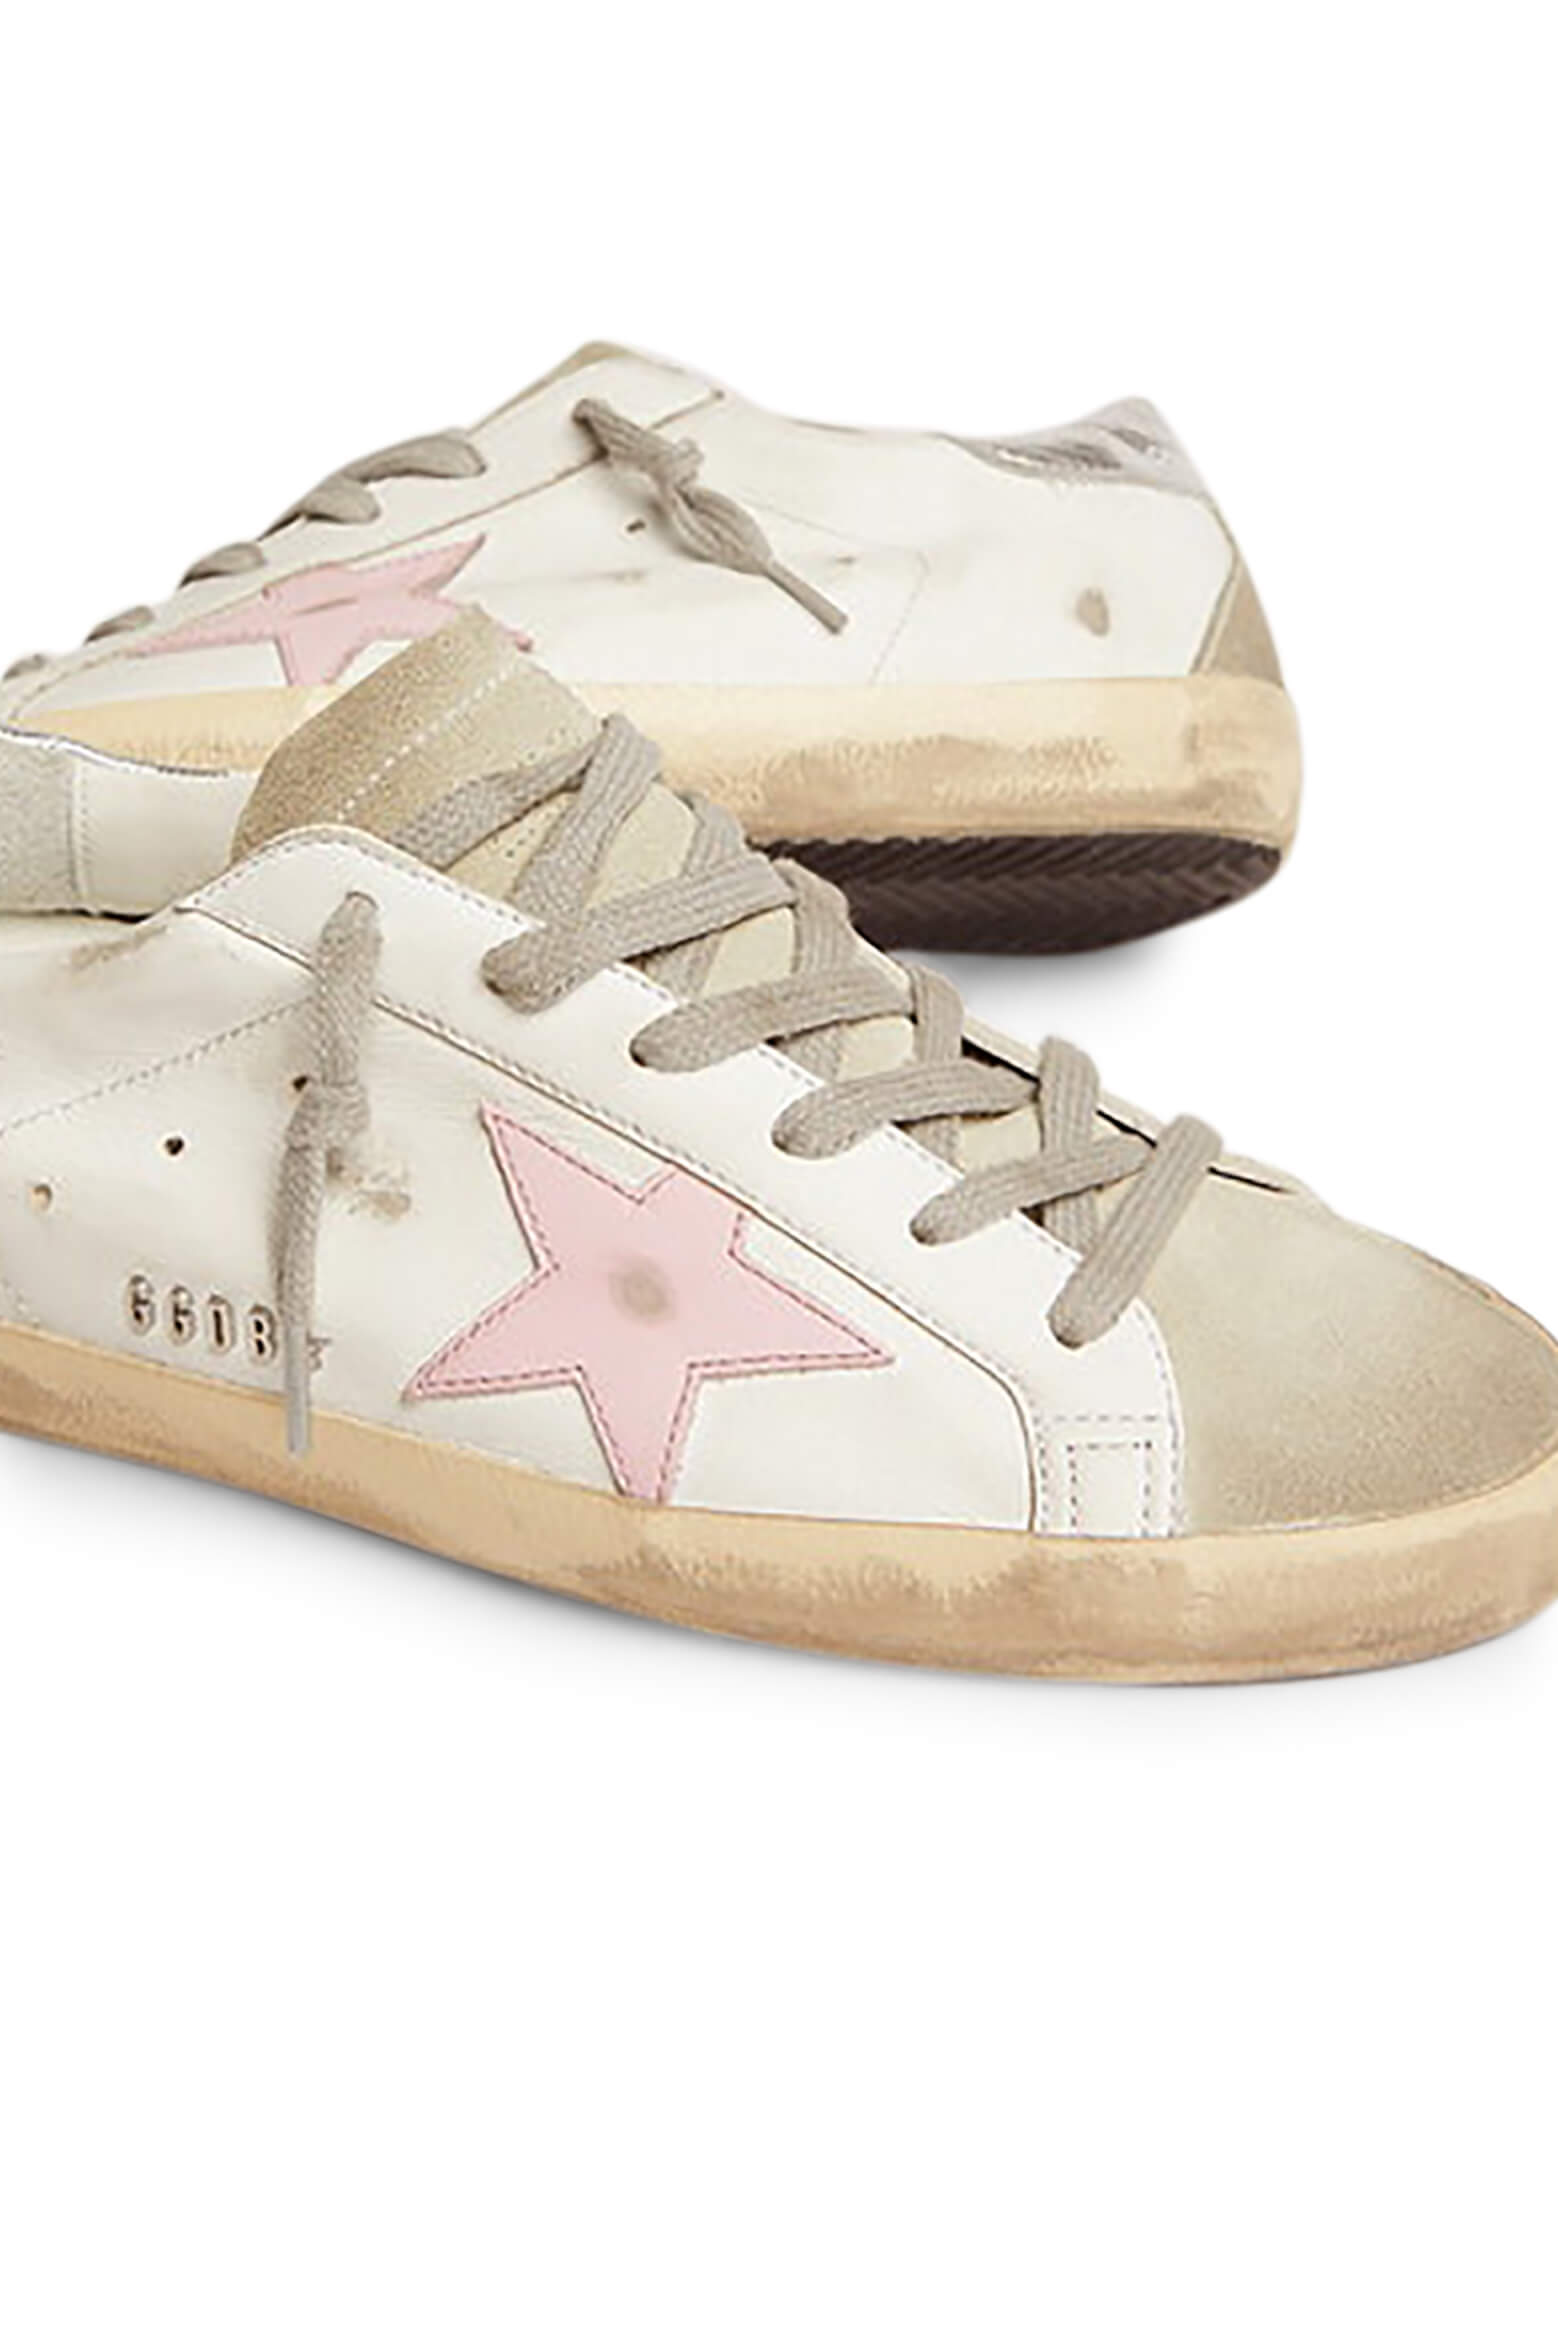 Golden Goose Superstar Sneakers in White Ice Orchid Pink and Silver from The New Trend